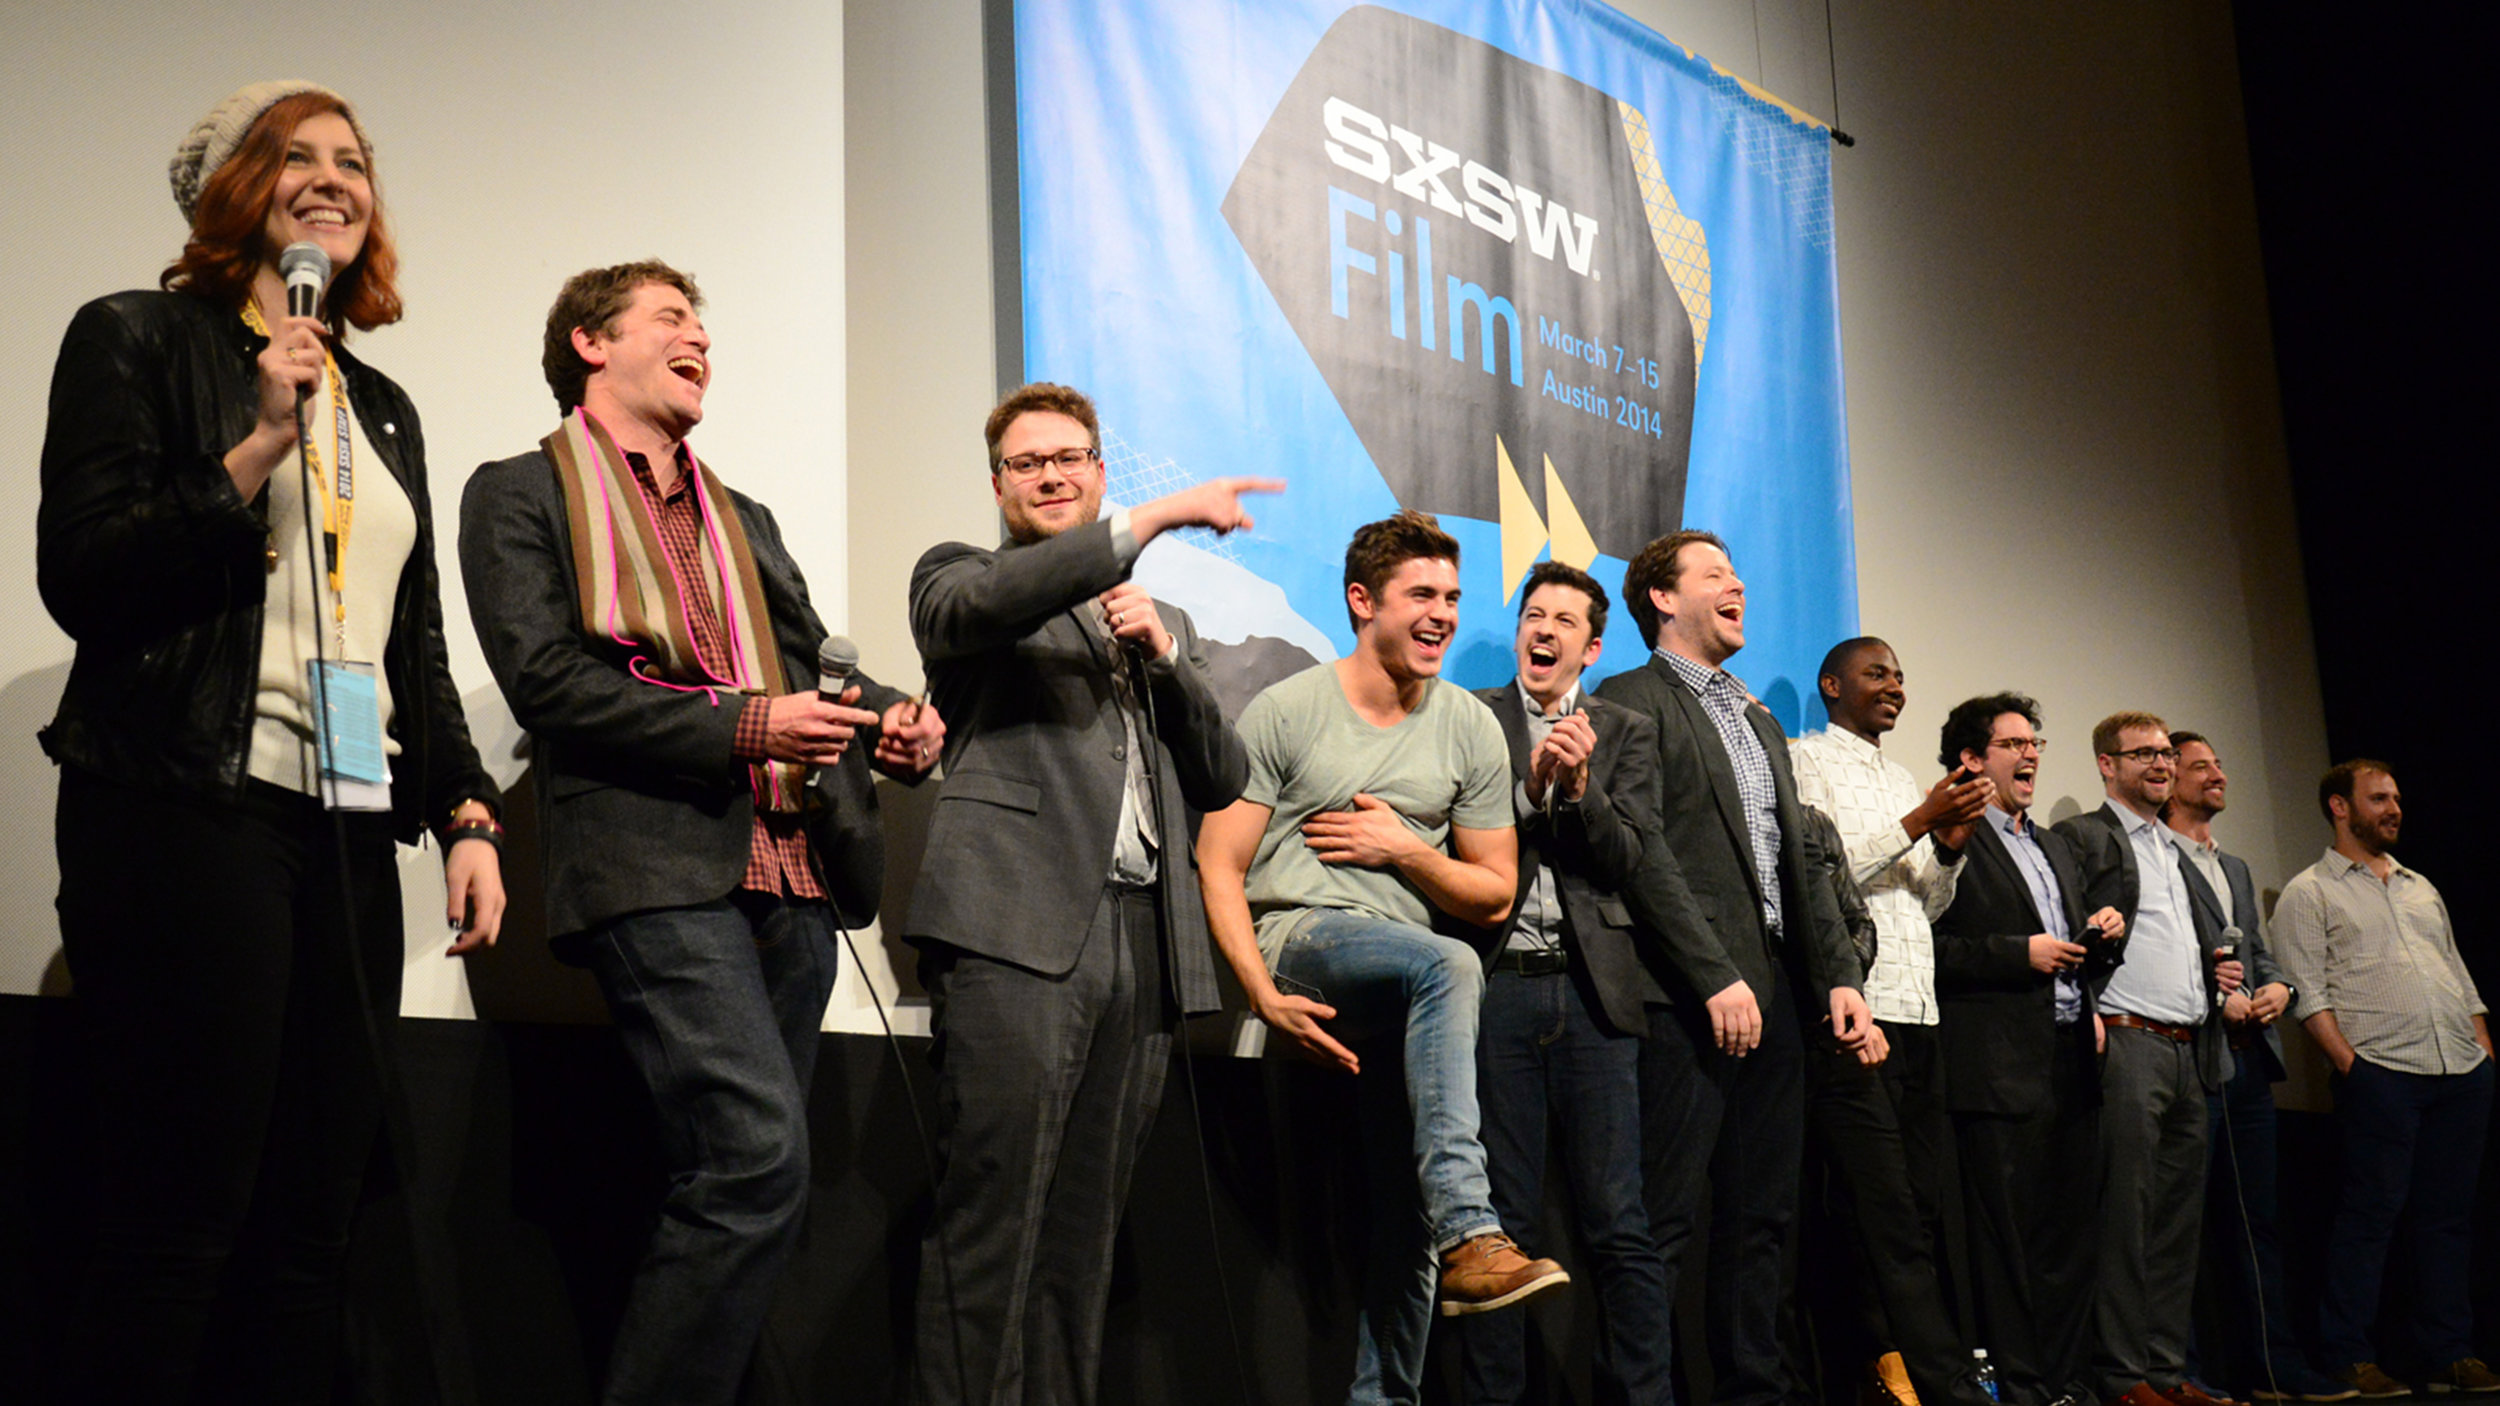 SXSW Film Premiere of Neighbors, moderated by Rebecca Feferman, The FefCo